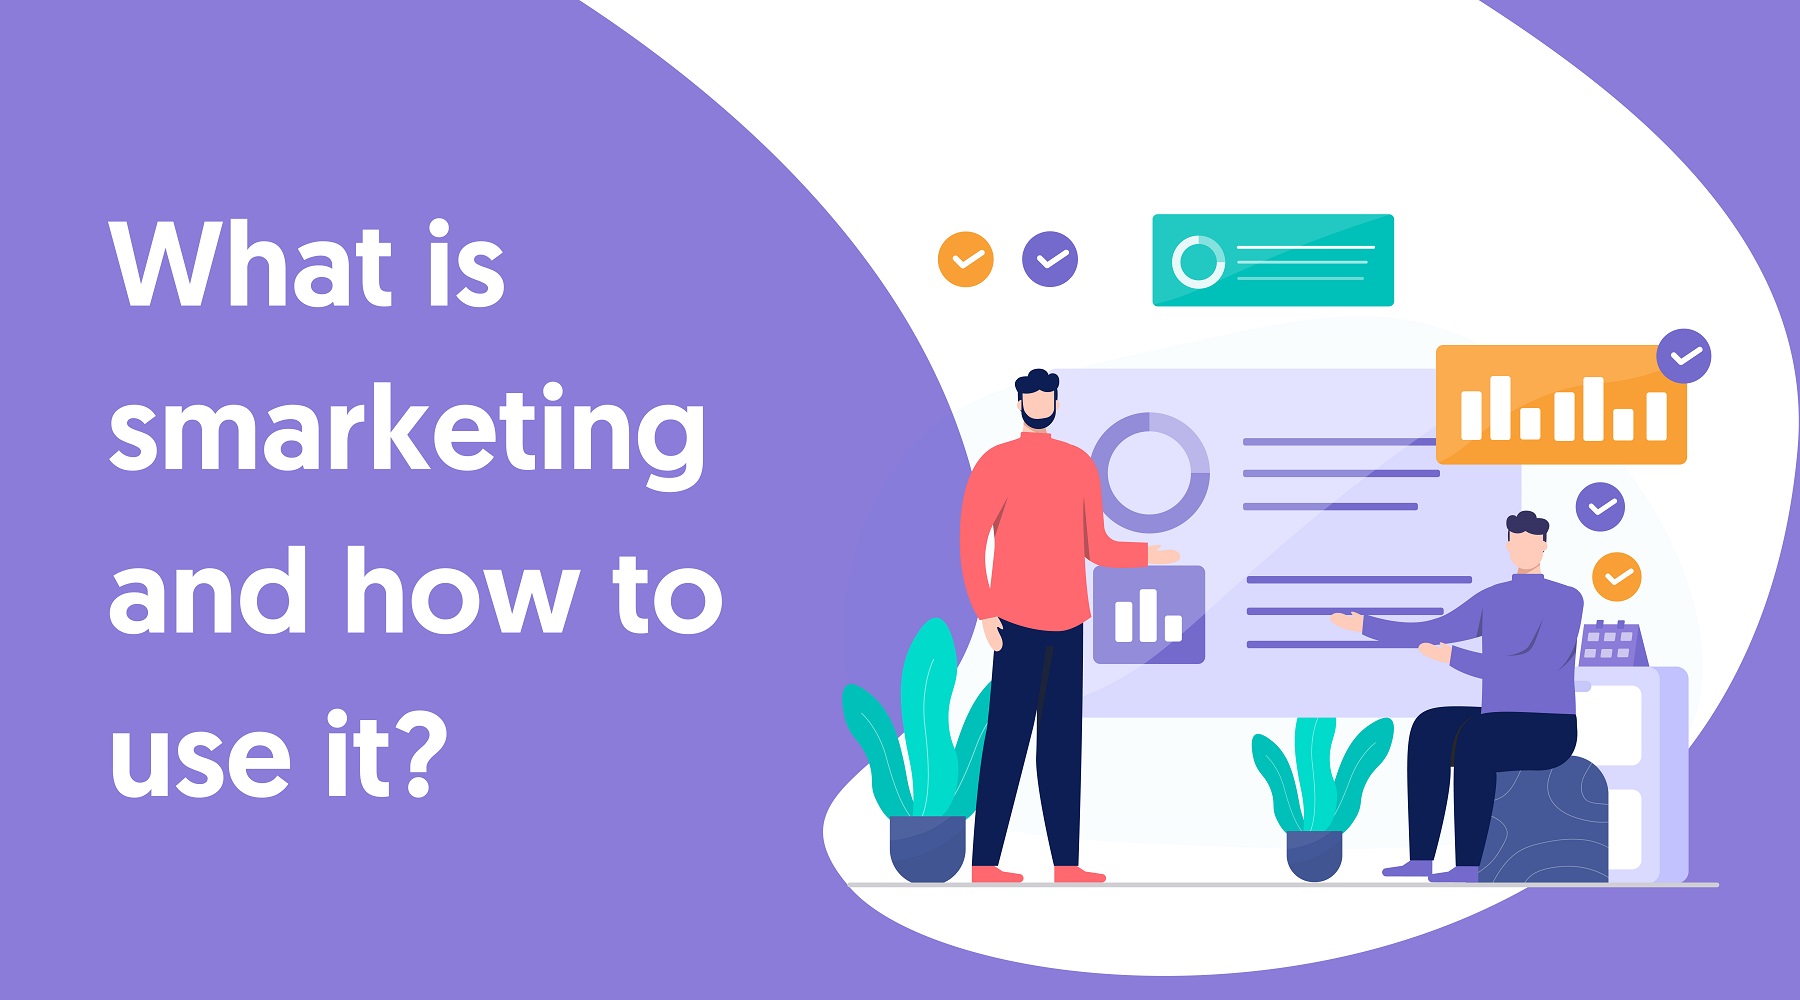 What is smarketing and how to use it